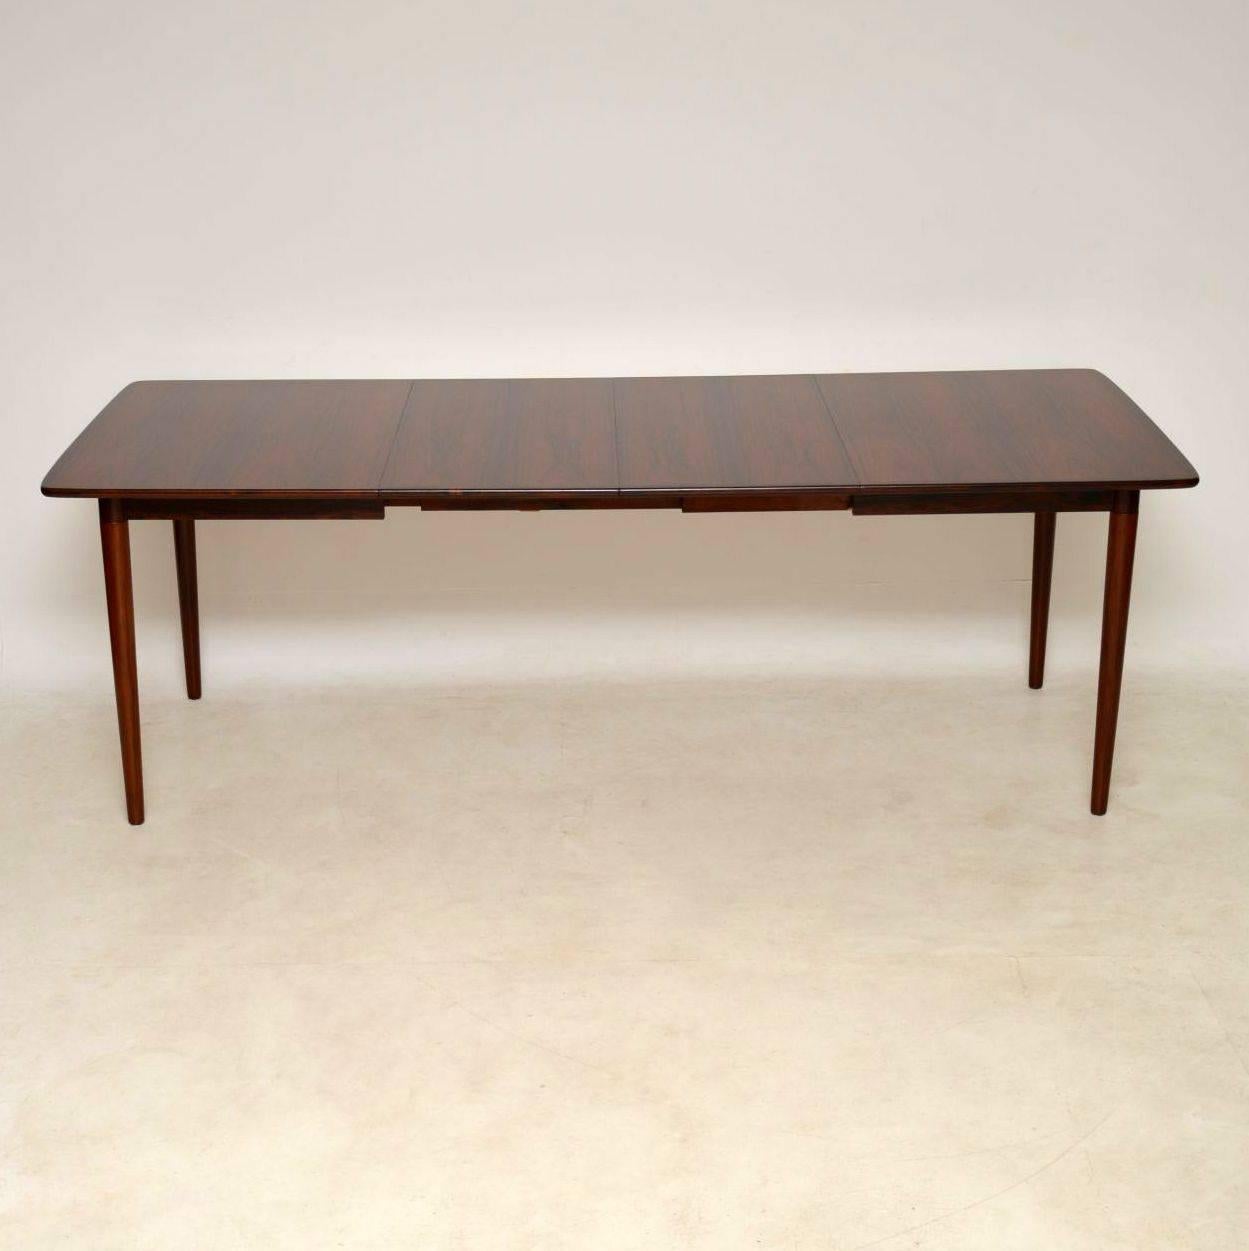 Mid-Century Modern 1960s Vintage Dining Table by Rastad & Relling for Bahus